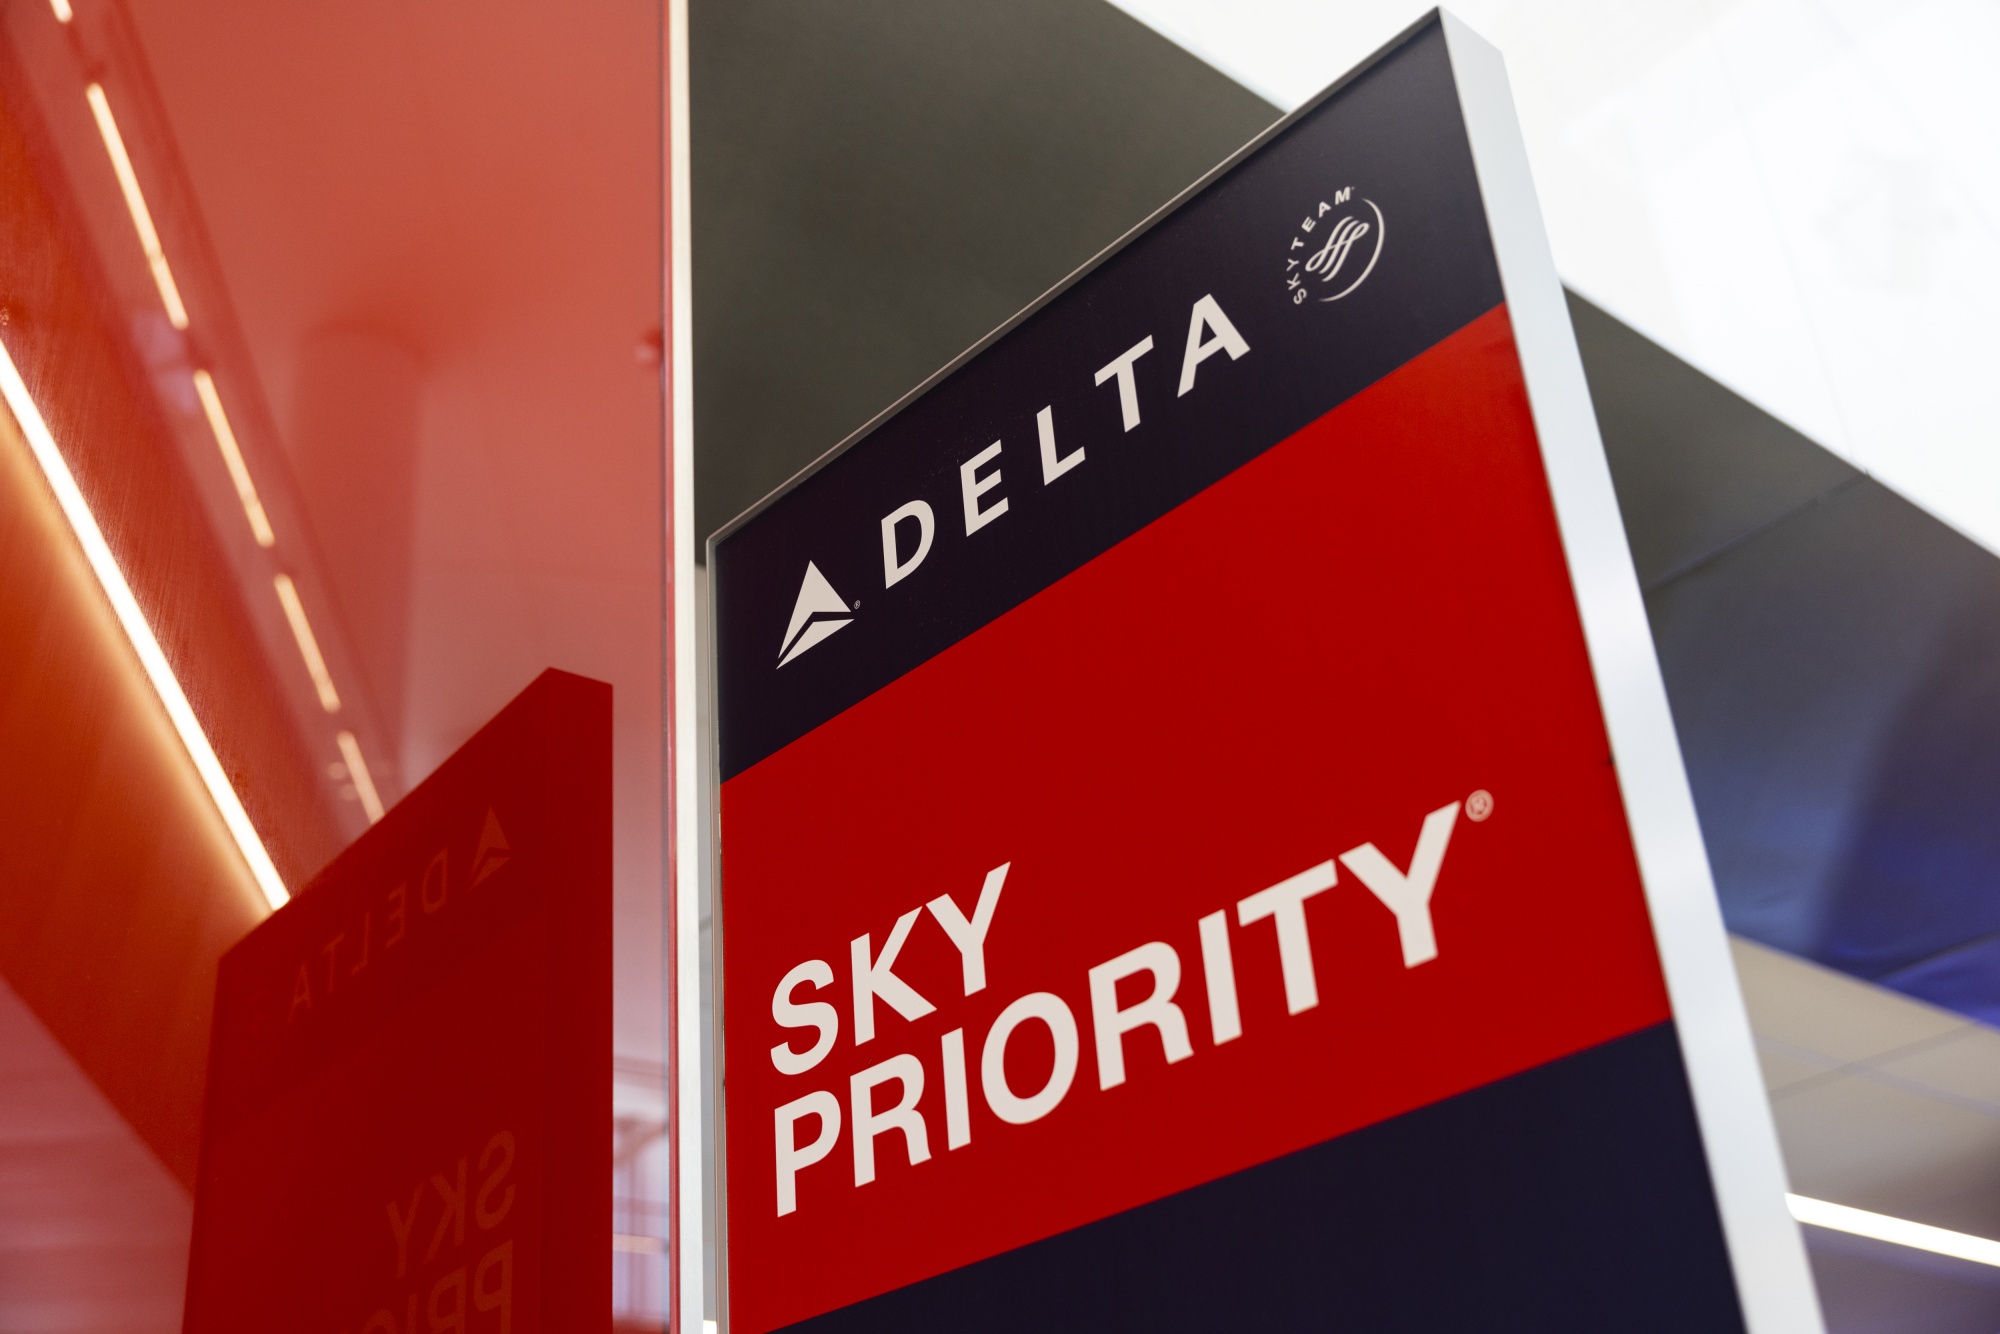 Delta CEO says it went too far with SkyMiles program changes